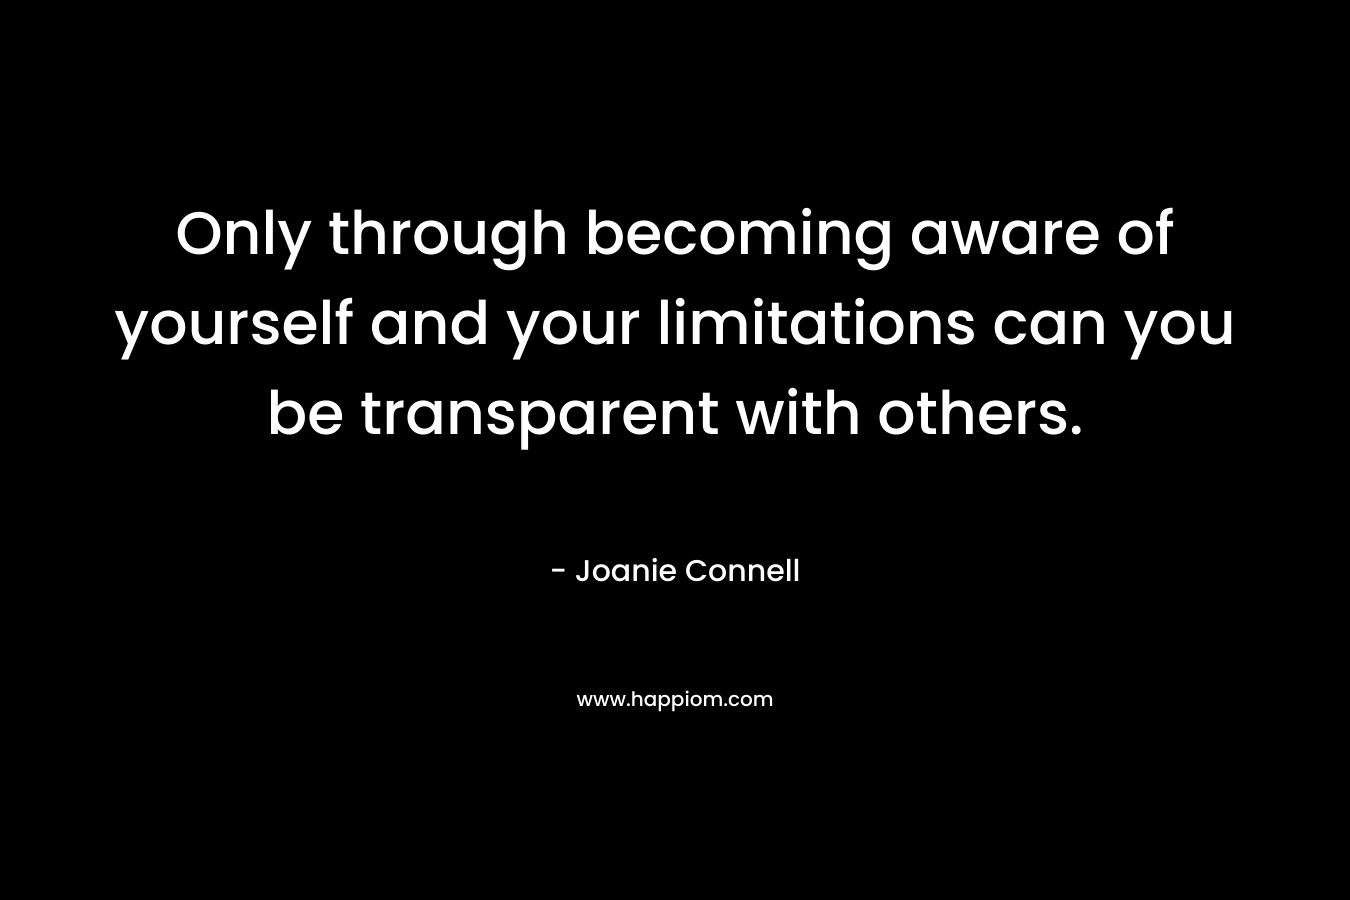 Only through becoming aware of yourself and your limitations can you be transparent with others.